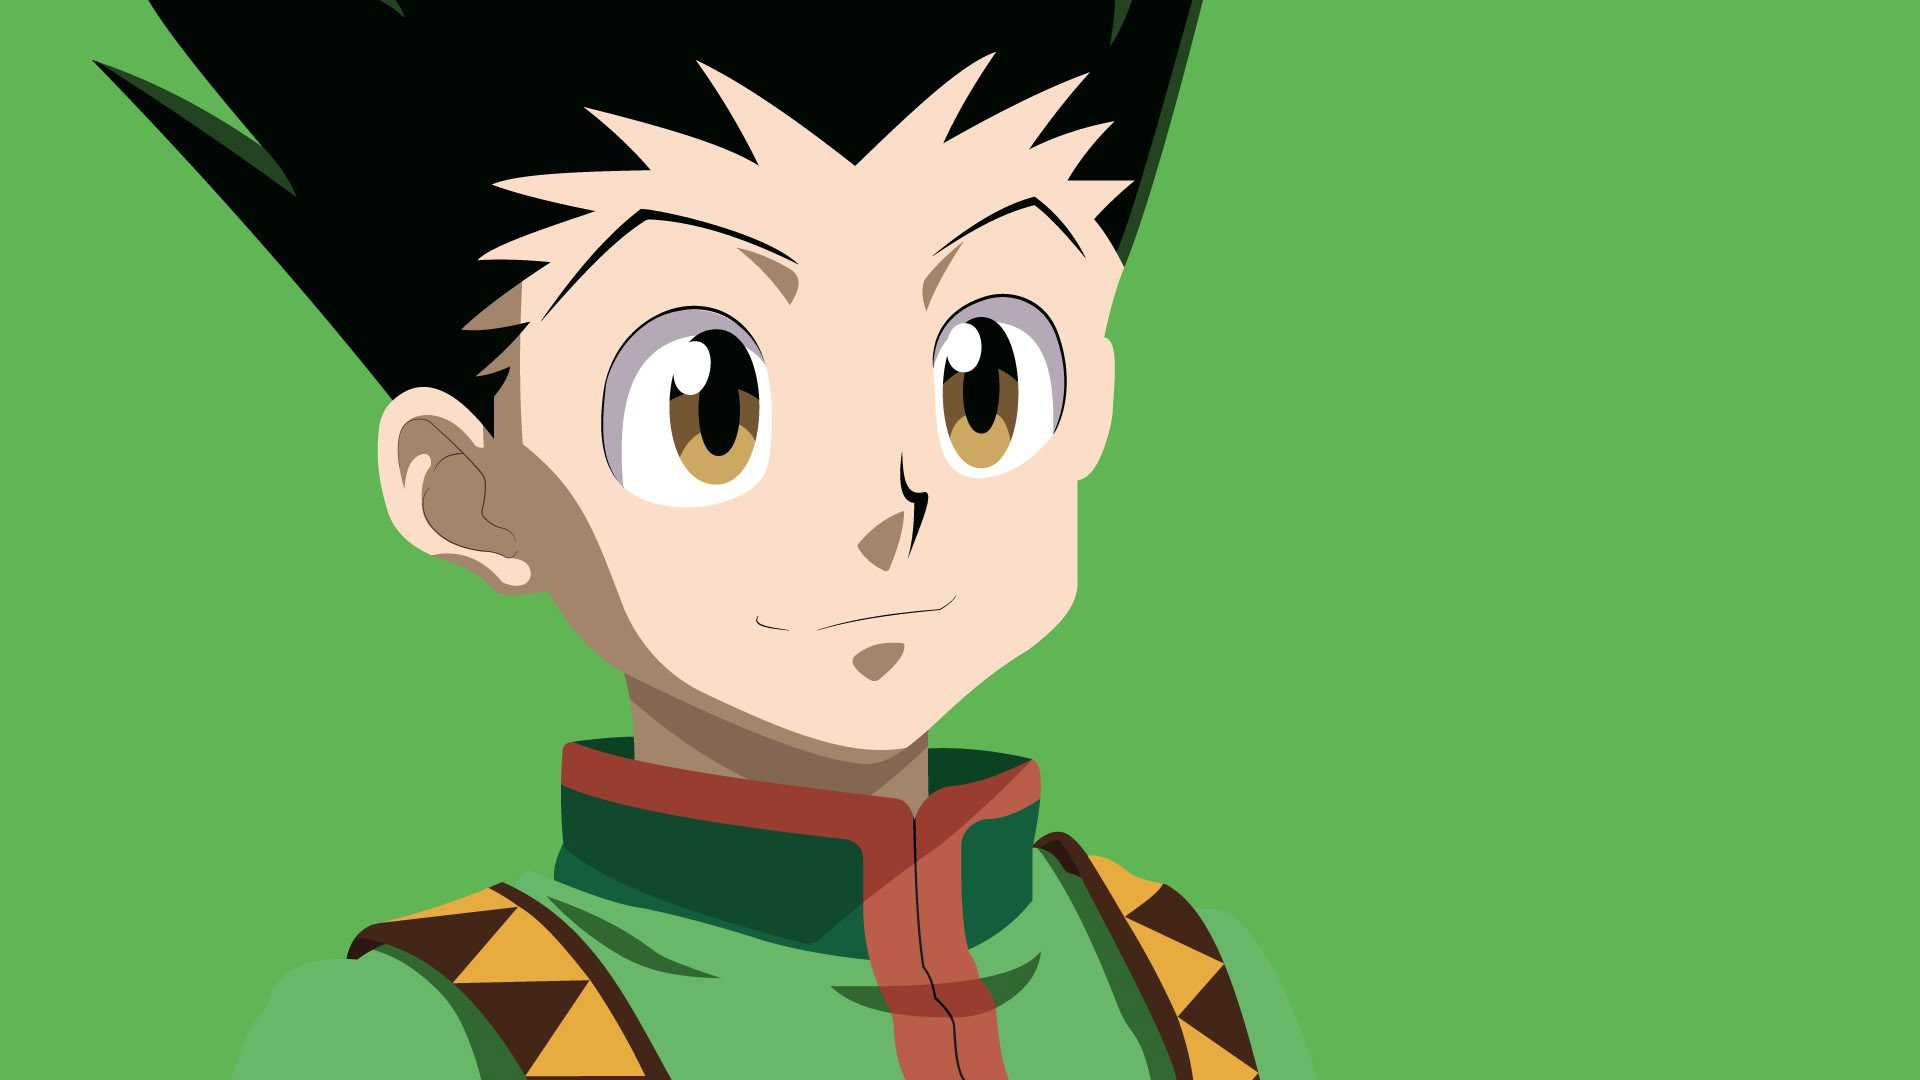 Gon Freecss: A boy with big hazel eyes, A simple-minded character, A trait common with Enhancers. 1920x1080 Full HD Background.